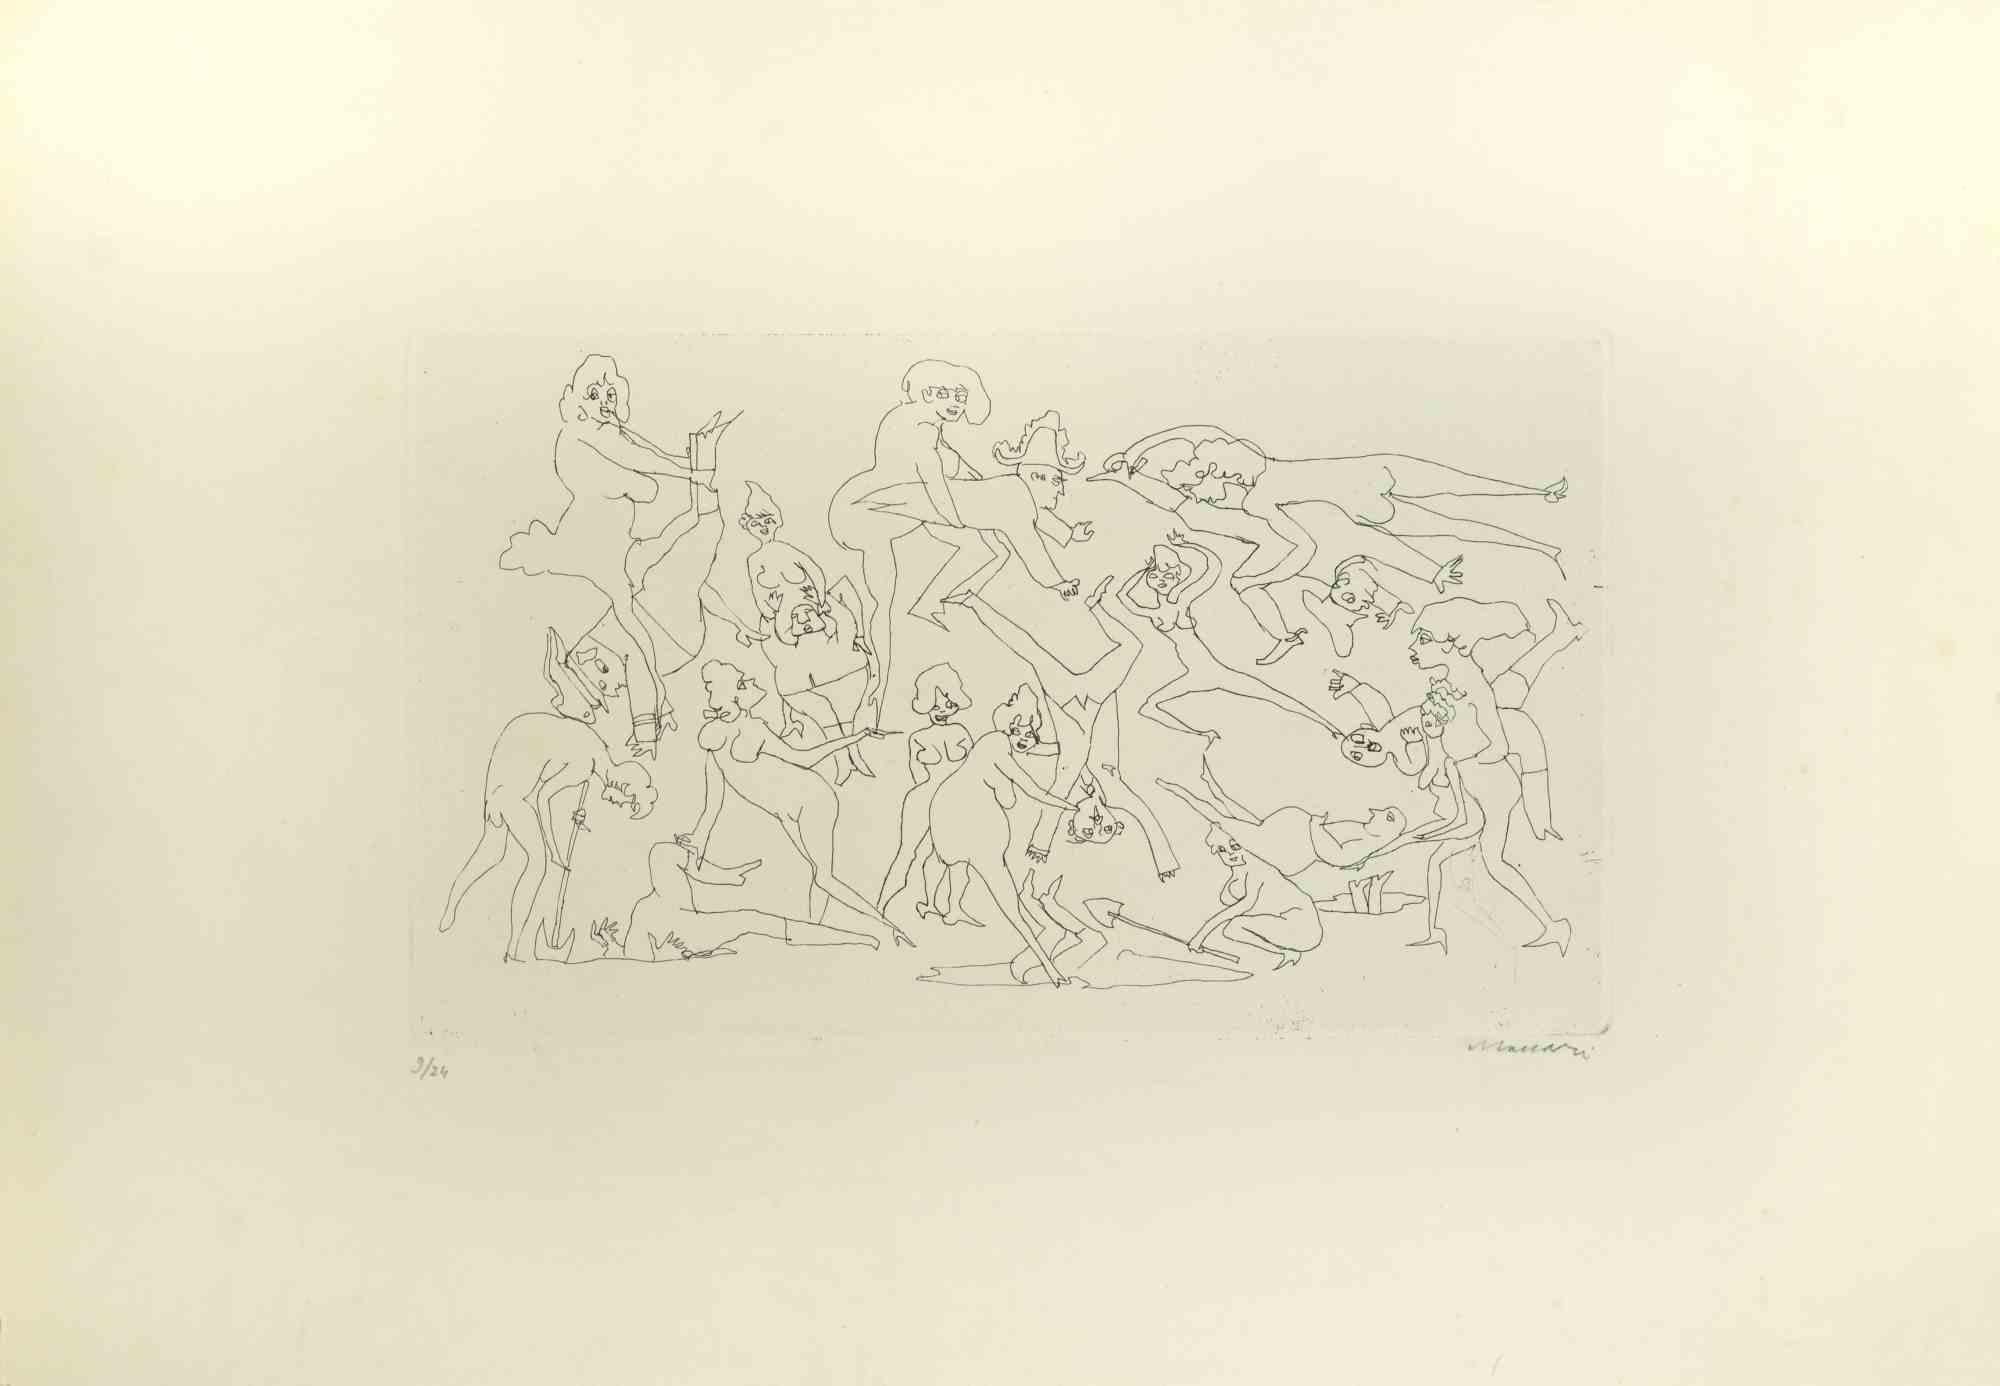 Men and Women is an Etching and Drypoint realized by Mino Maccari in the Mid-20th Century.

Hand-signed in the lower right part.

Numbered. Edition,9/24.

Good conditions.

Mino Maccari (Siena, 1924-Rome, June 16, 1989) was an Italian writer,